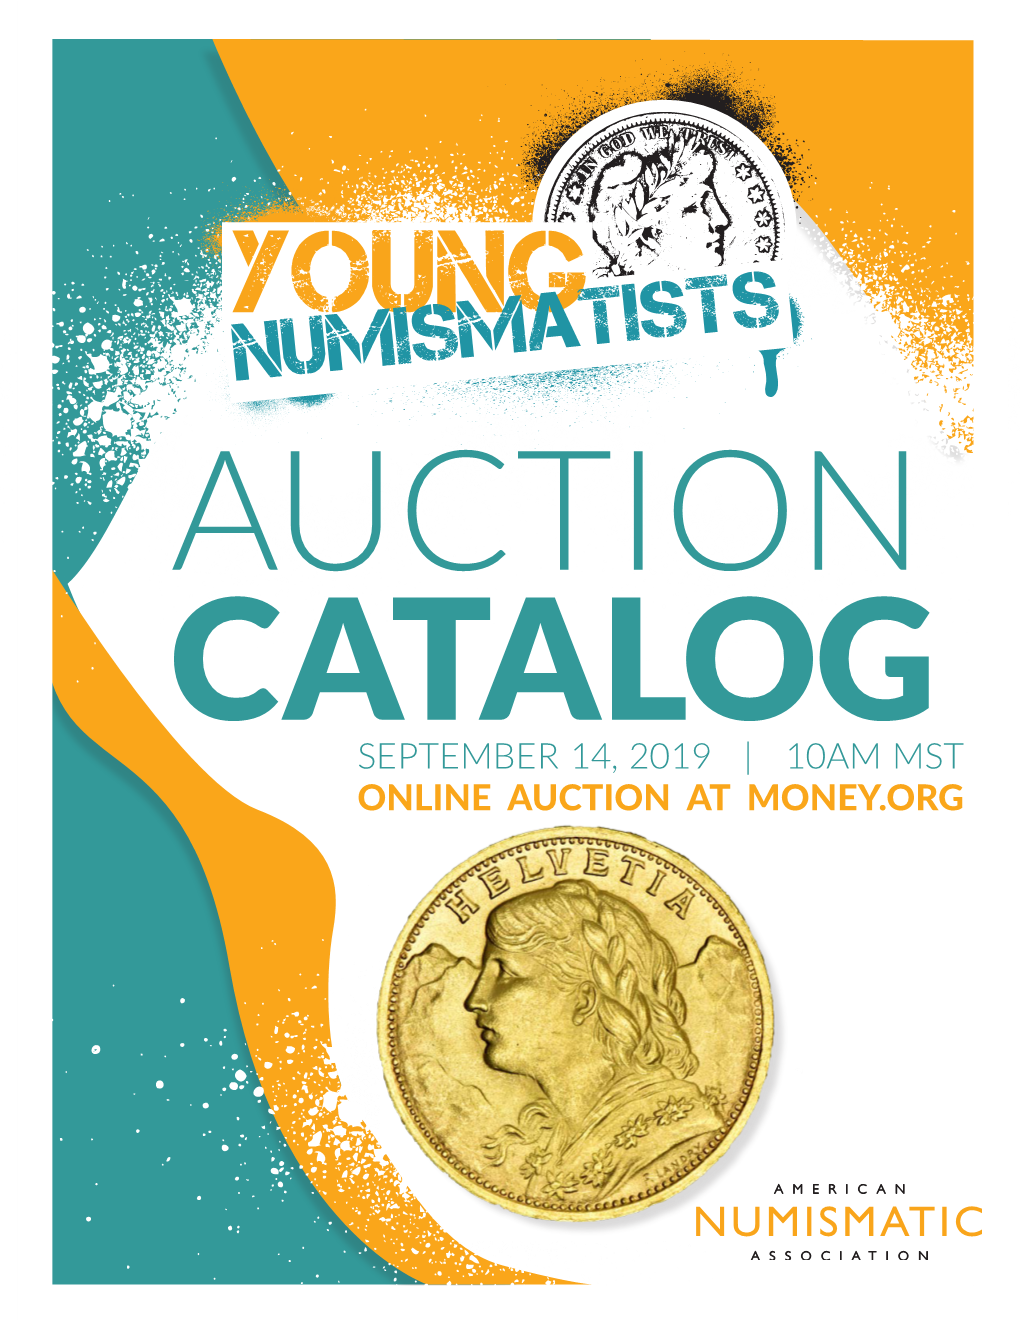 Young Numismatists AUCTION CATALOG SEPTEMBER 14, 2019 | 10AM MST ONLINE AUCTION at MONEY.ORG